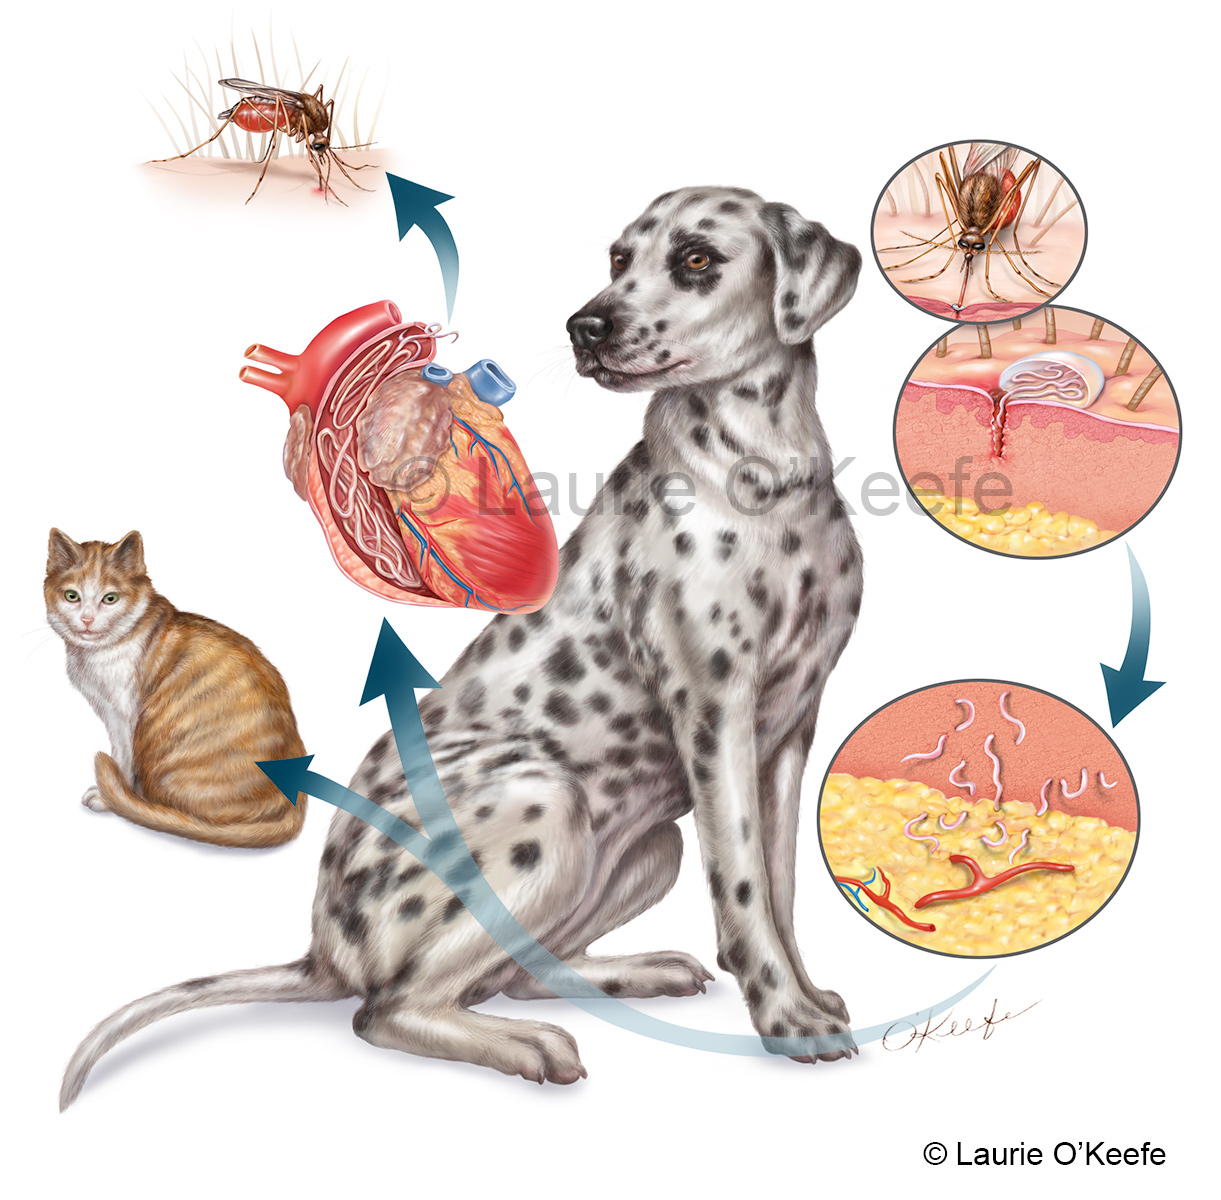 Veterinary - Laurie O'Keefe Illustration